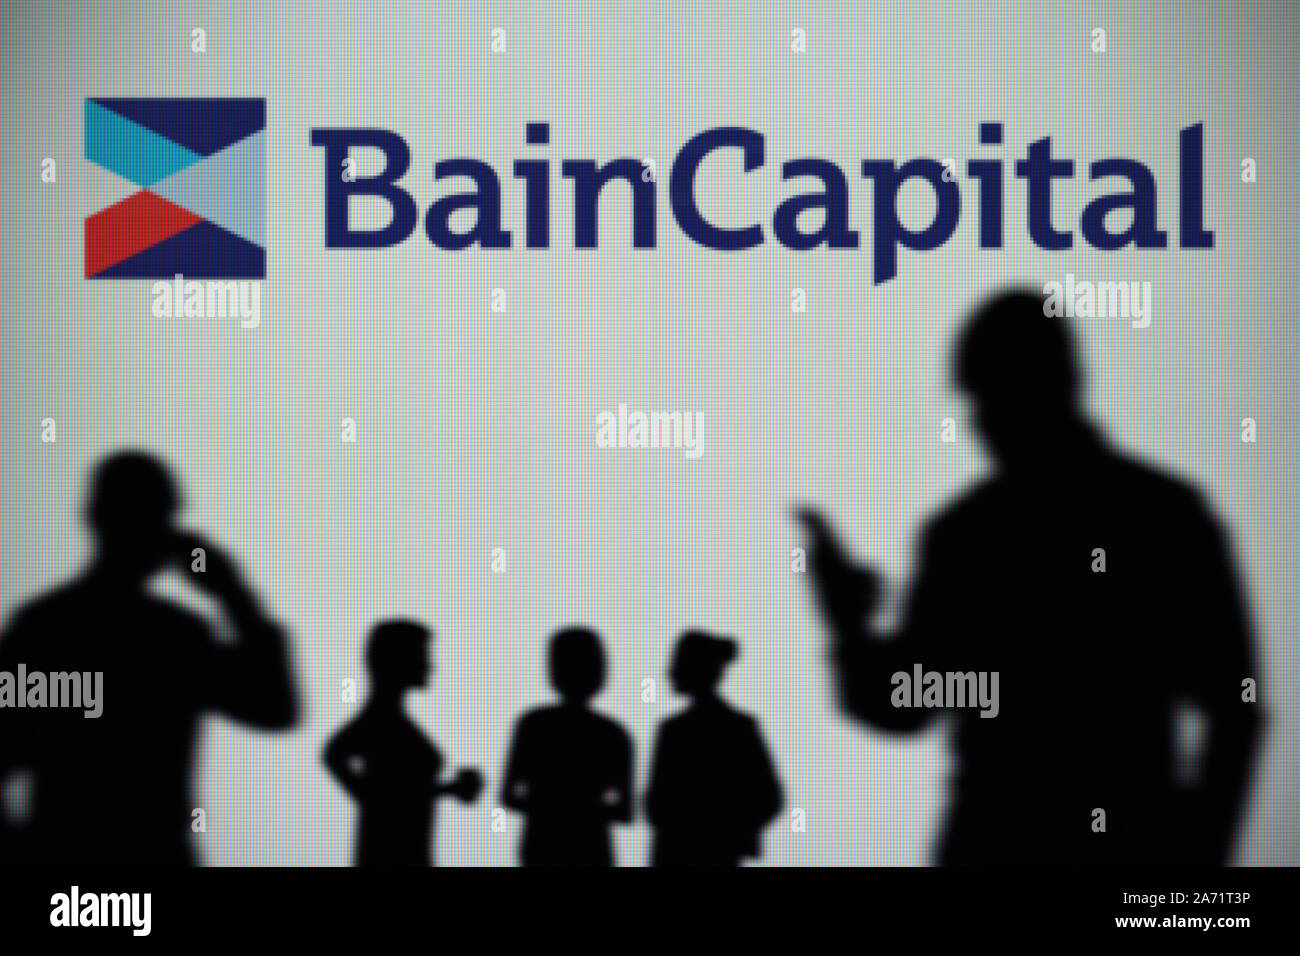 The Bain Capital logo is seen on an LED screen in the background while a silhouetted person uses a smartphone (Editorial use only) Stock Photo